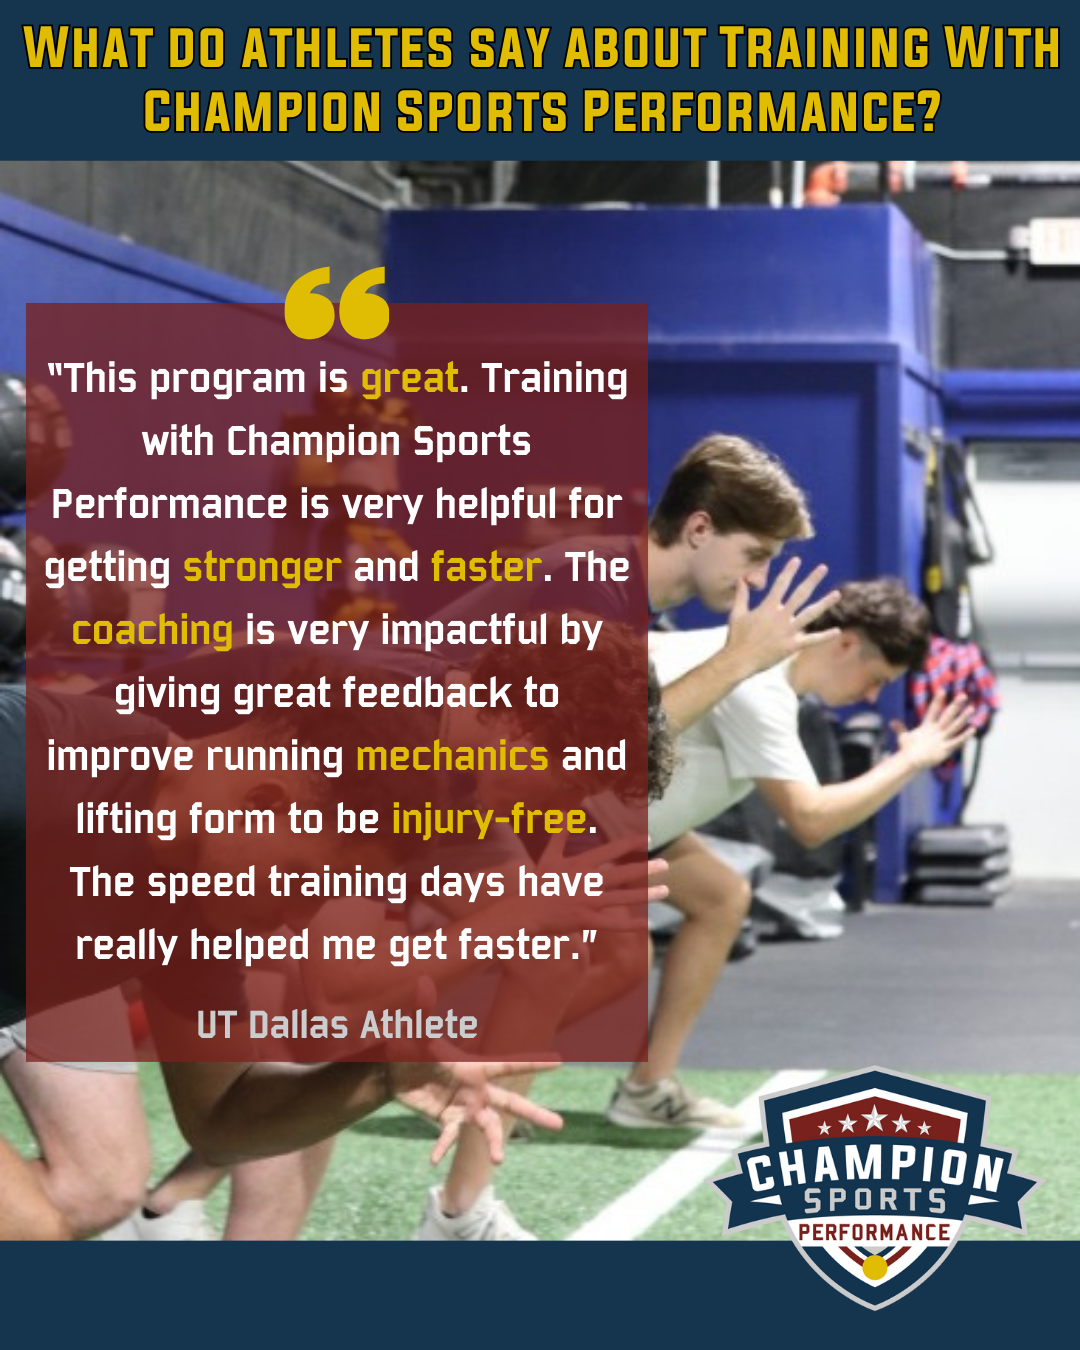 UTD College Baseball - This program is great. Training with Champion Sports Performance is very helpful for getting stronger and faster. The coaching is very impactful by giving great feedback to improve running mechanics and lifting form to be injury-free. The speed training days have really helped me get faster. 